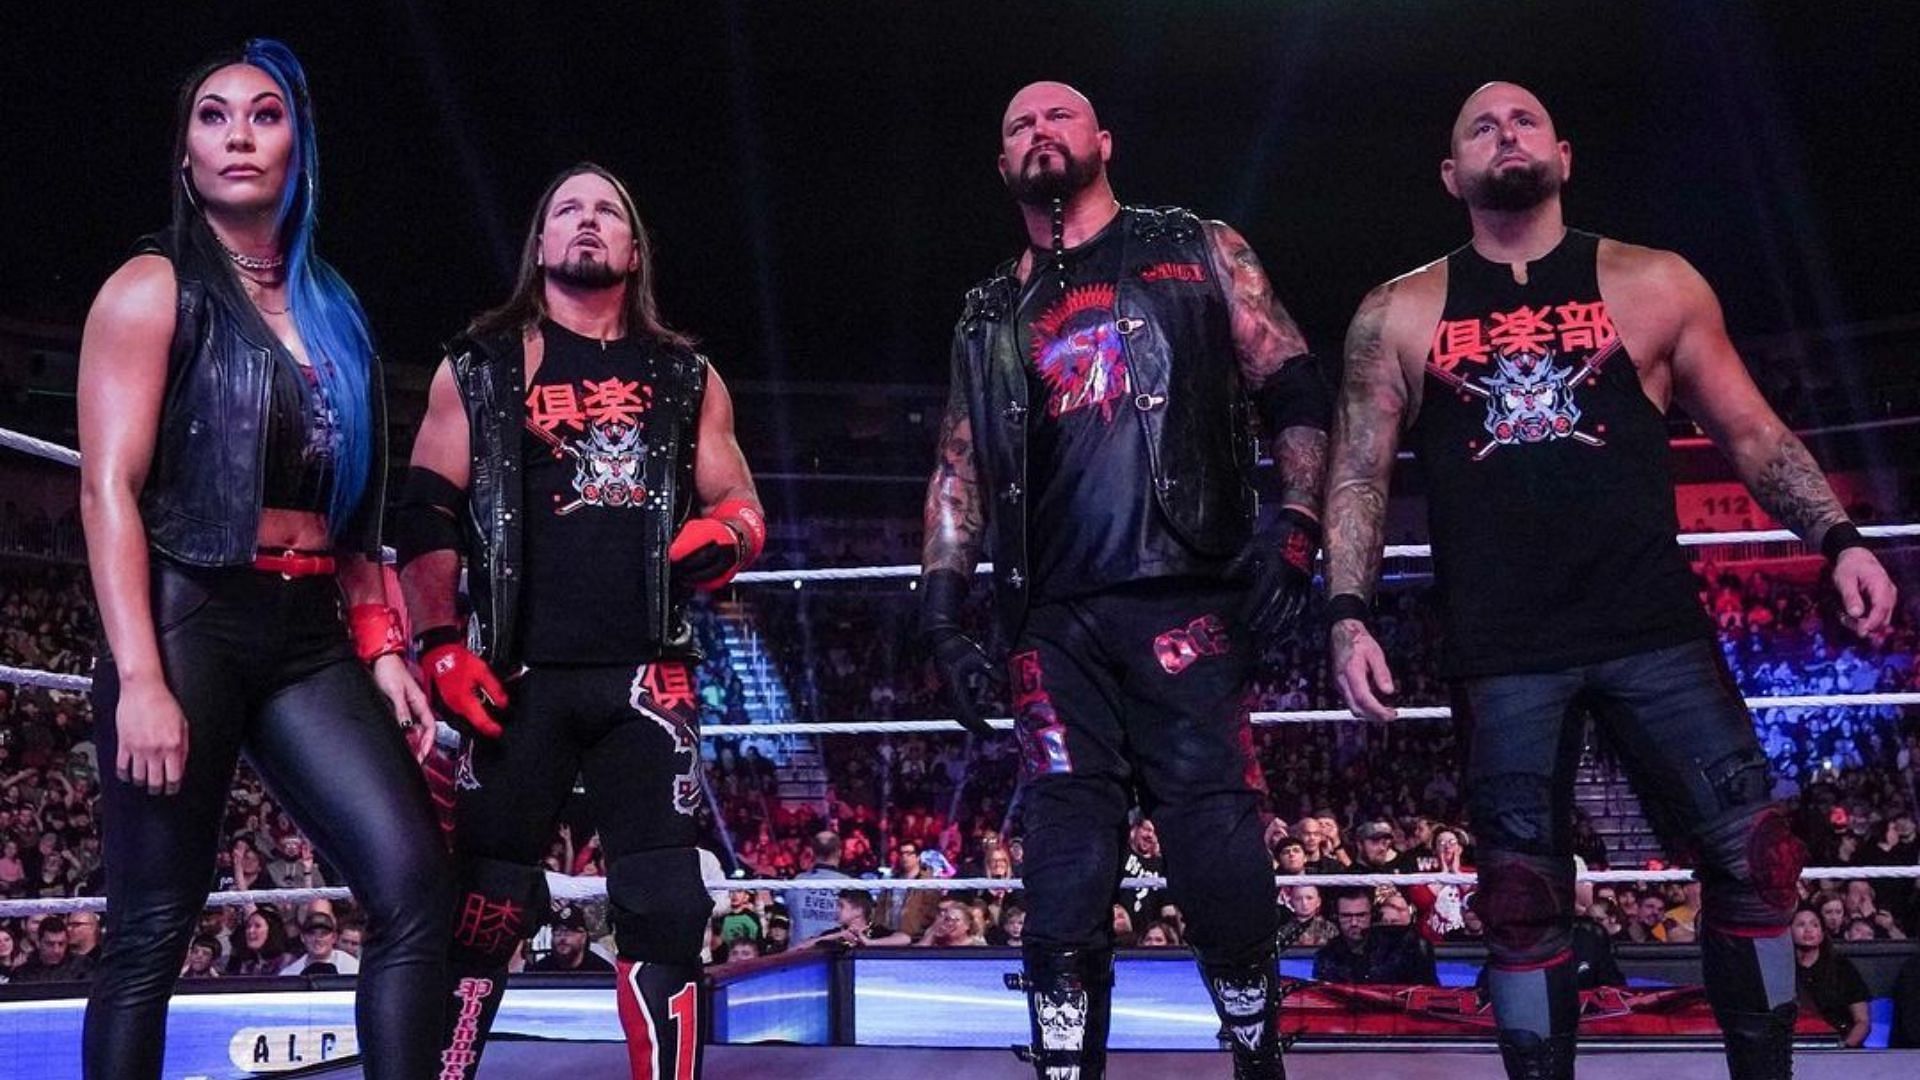 The Original Club are now members of the SmackDown roster!